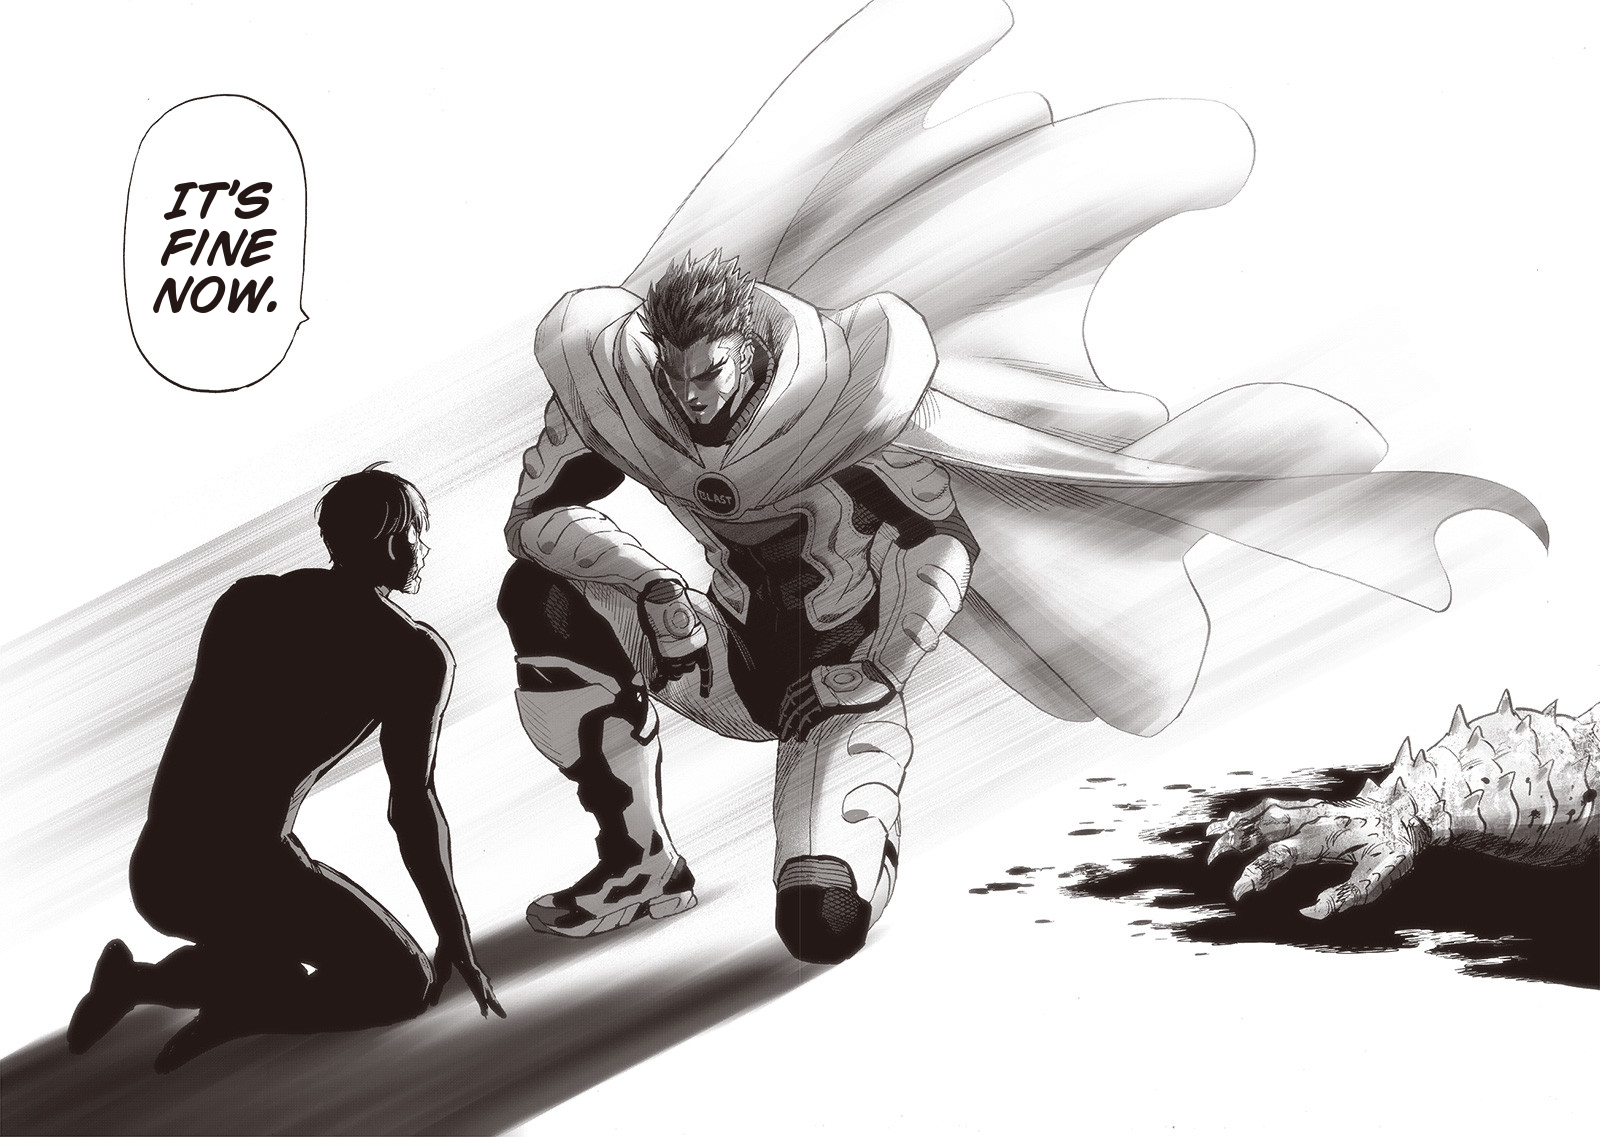 One Punch Man Chapter #28 Reviews